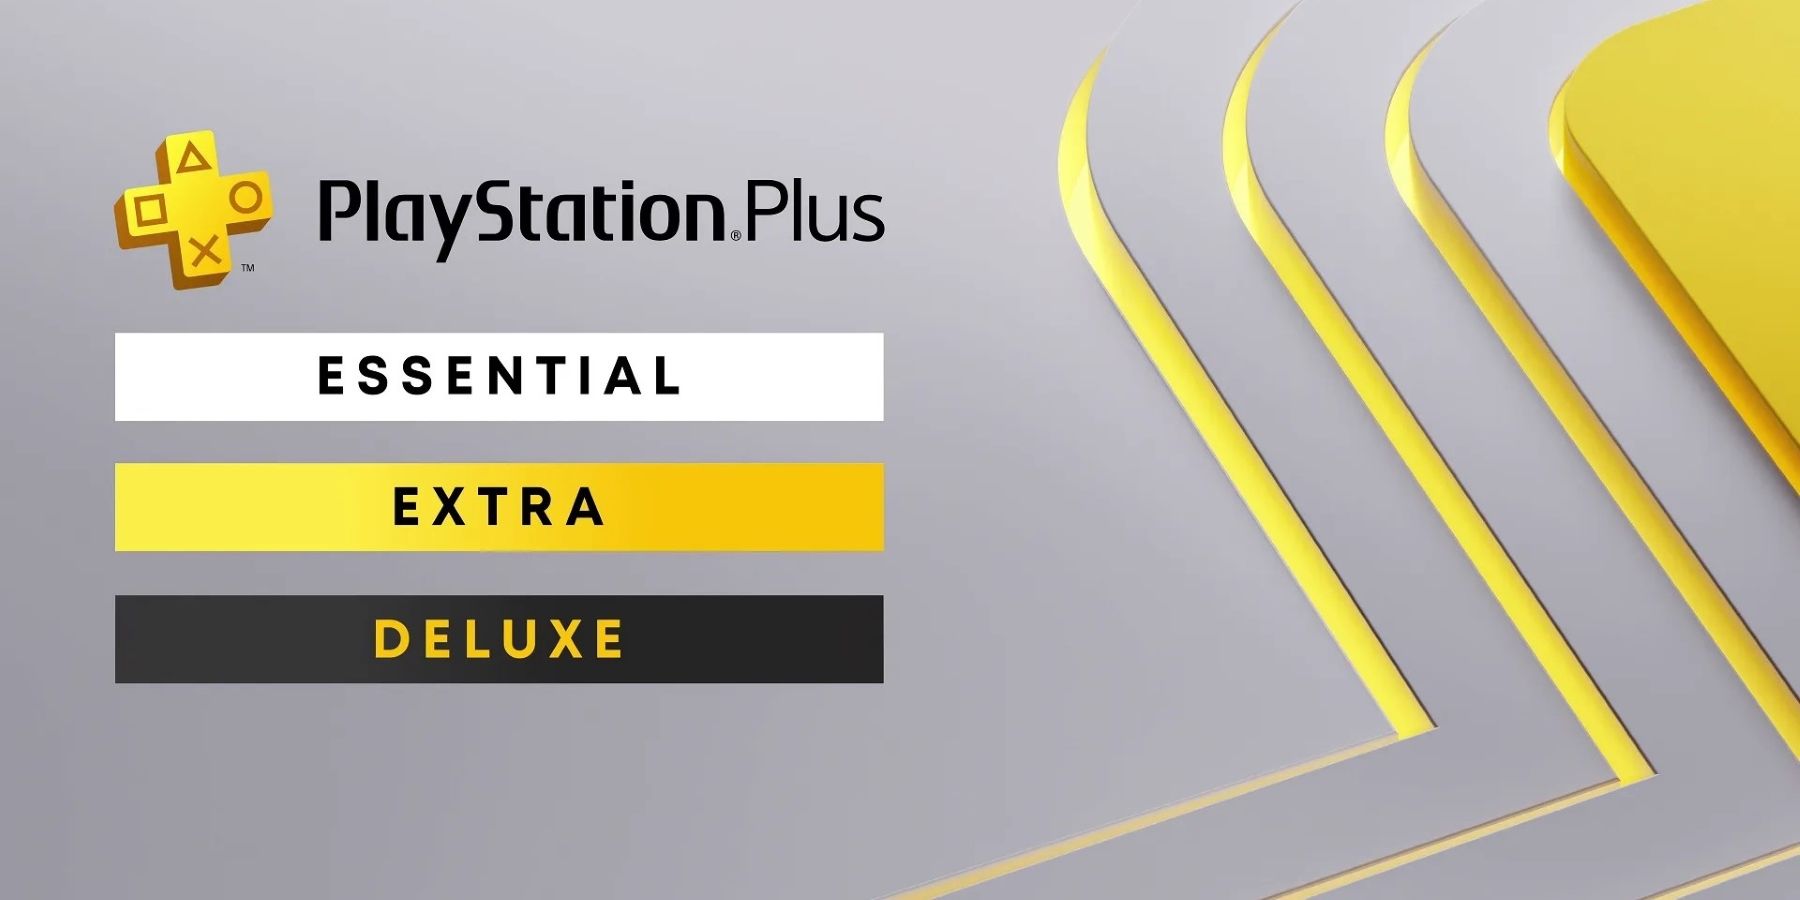 PlayStation Plus Essential free games for August 2023 announced